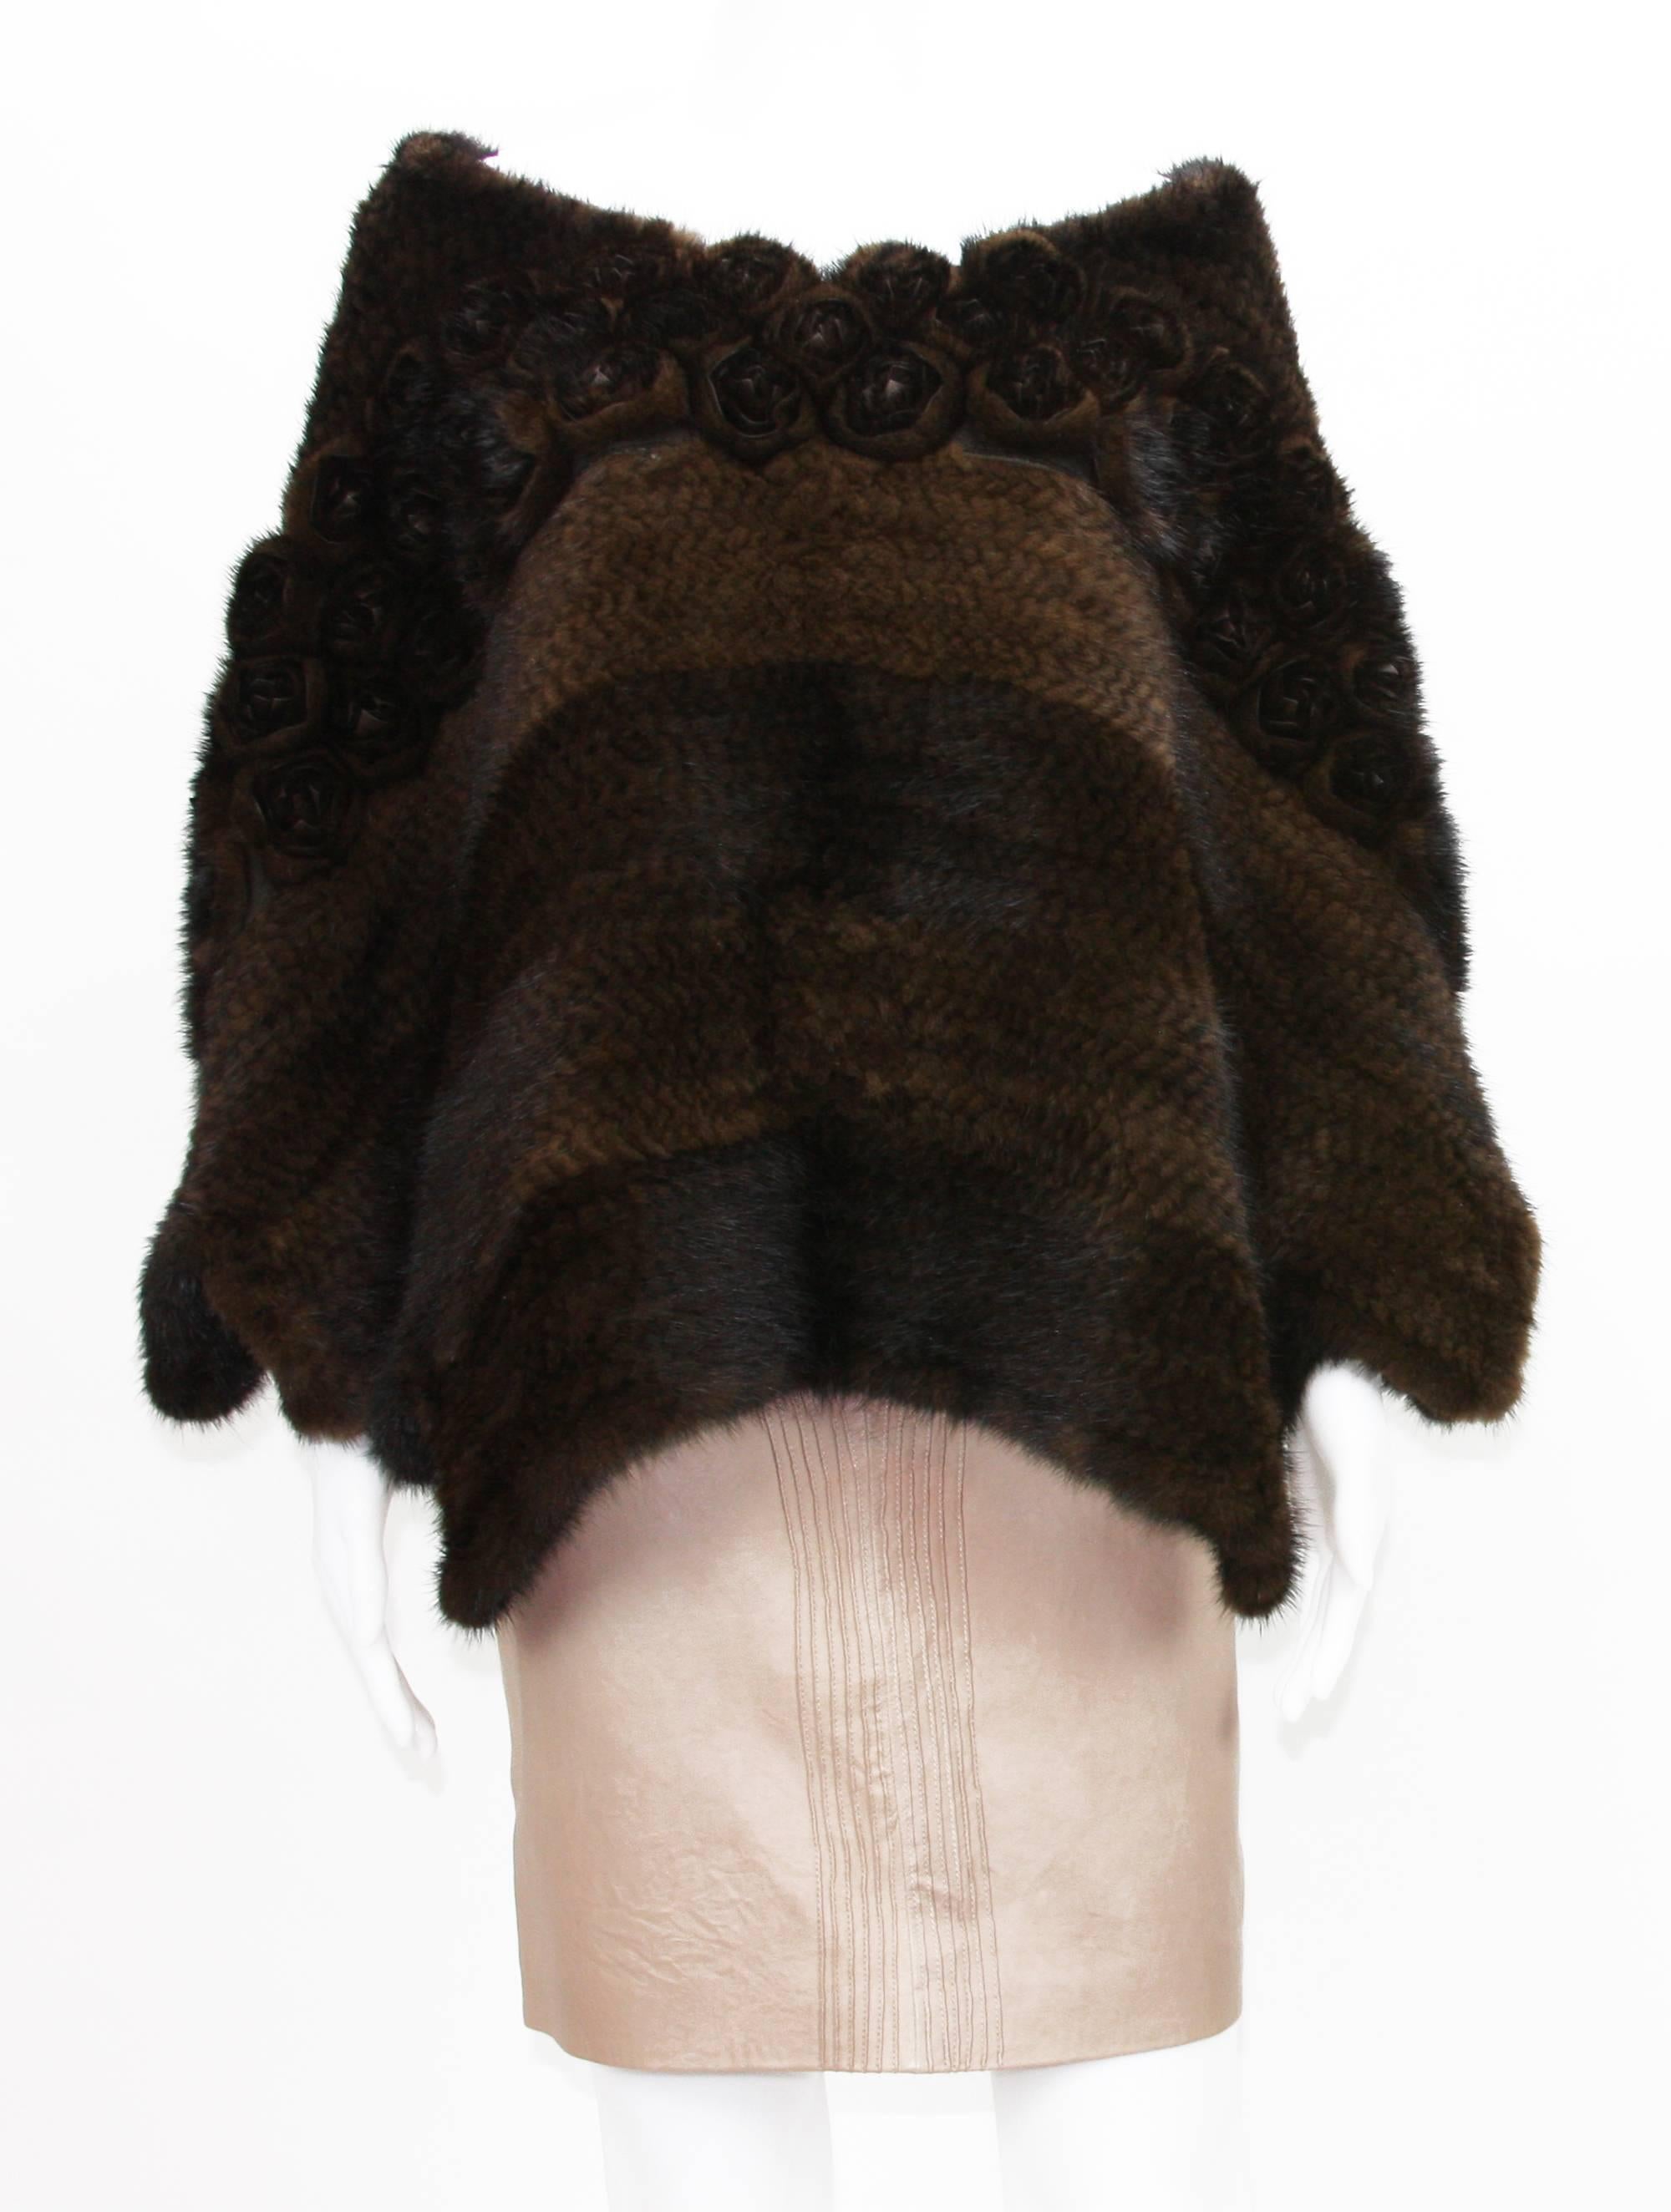 New Etro Knitted Mink Poncho Cape
Size S/M
Decorated with Leather/Mink Roses
Measurement: Length - 22.5 inches.
Made in Italy.